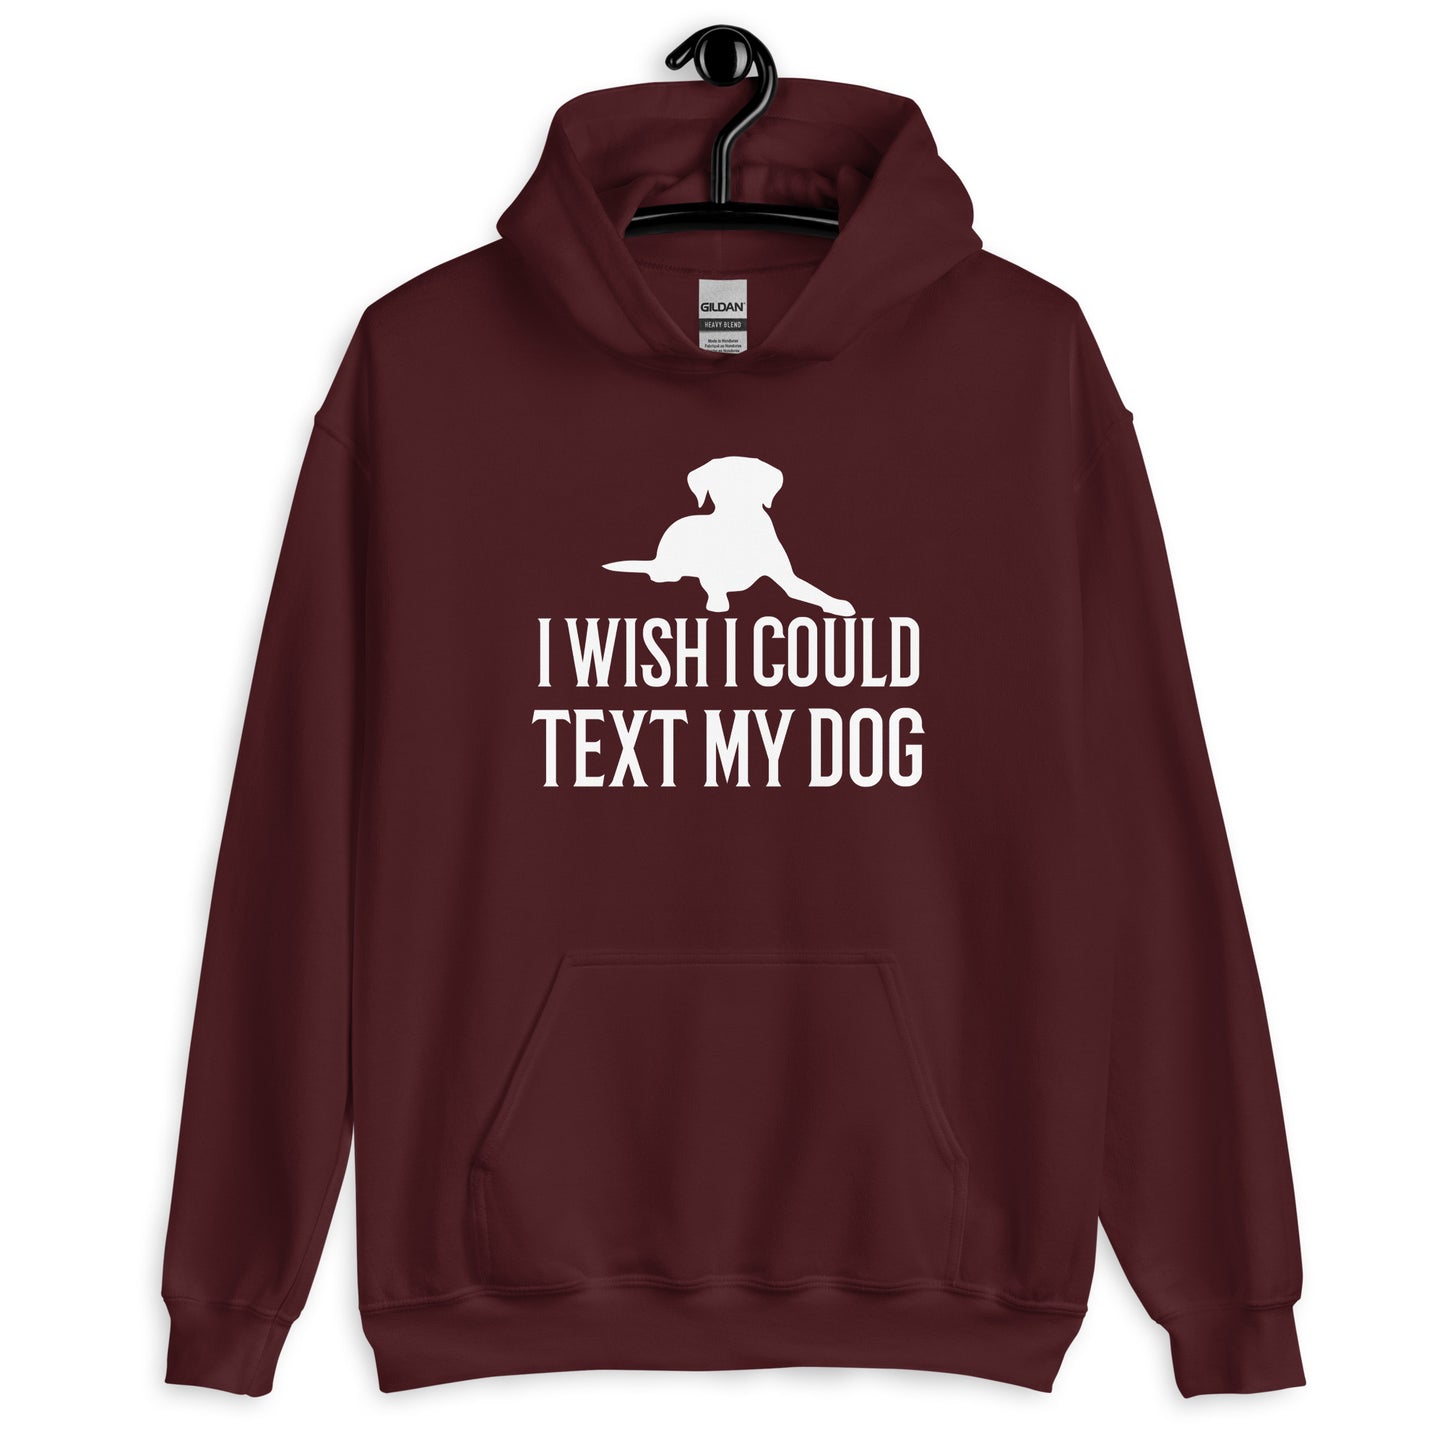 I Wish I Could Text My Dog Unisex Hoodie